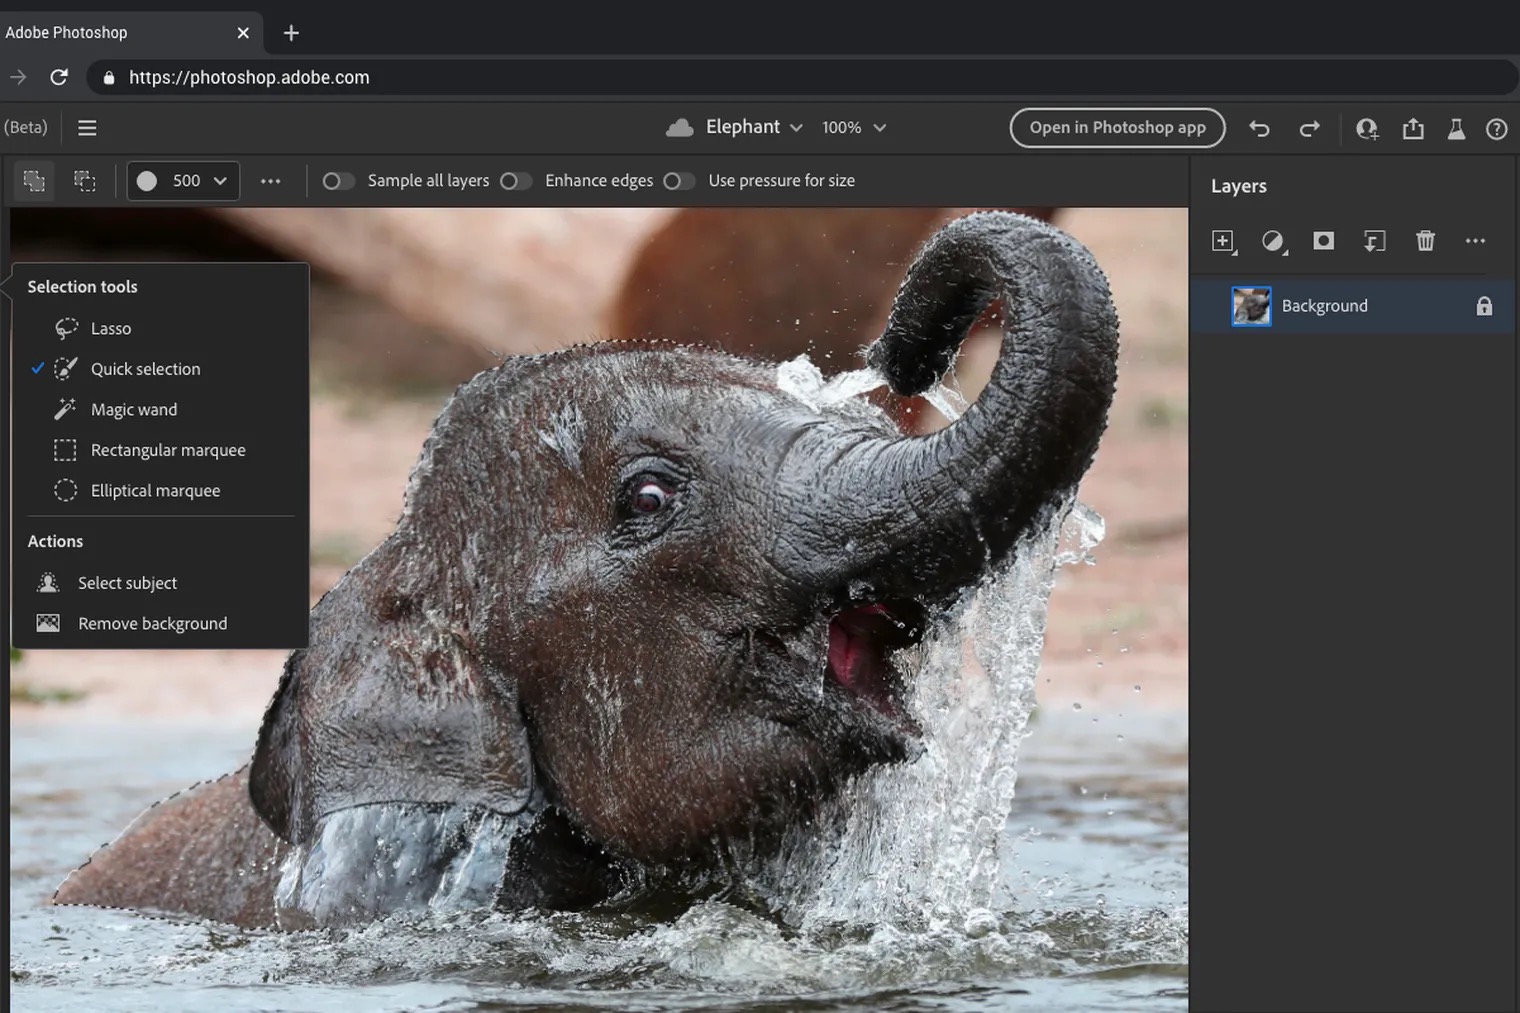 Adobe wants to make Photoshop free – but there’s a huge catch